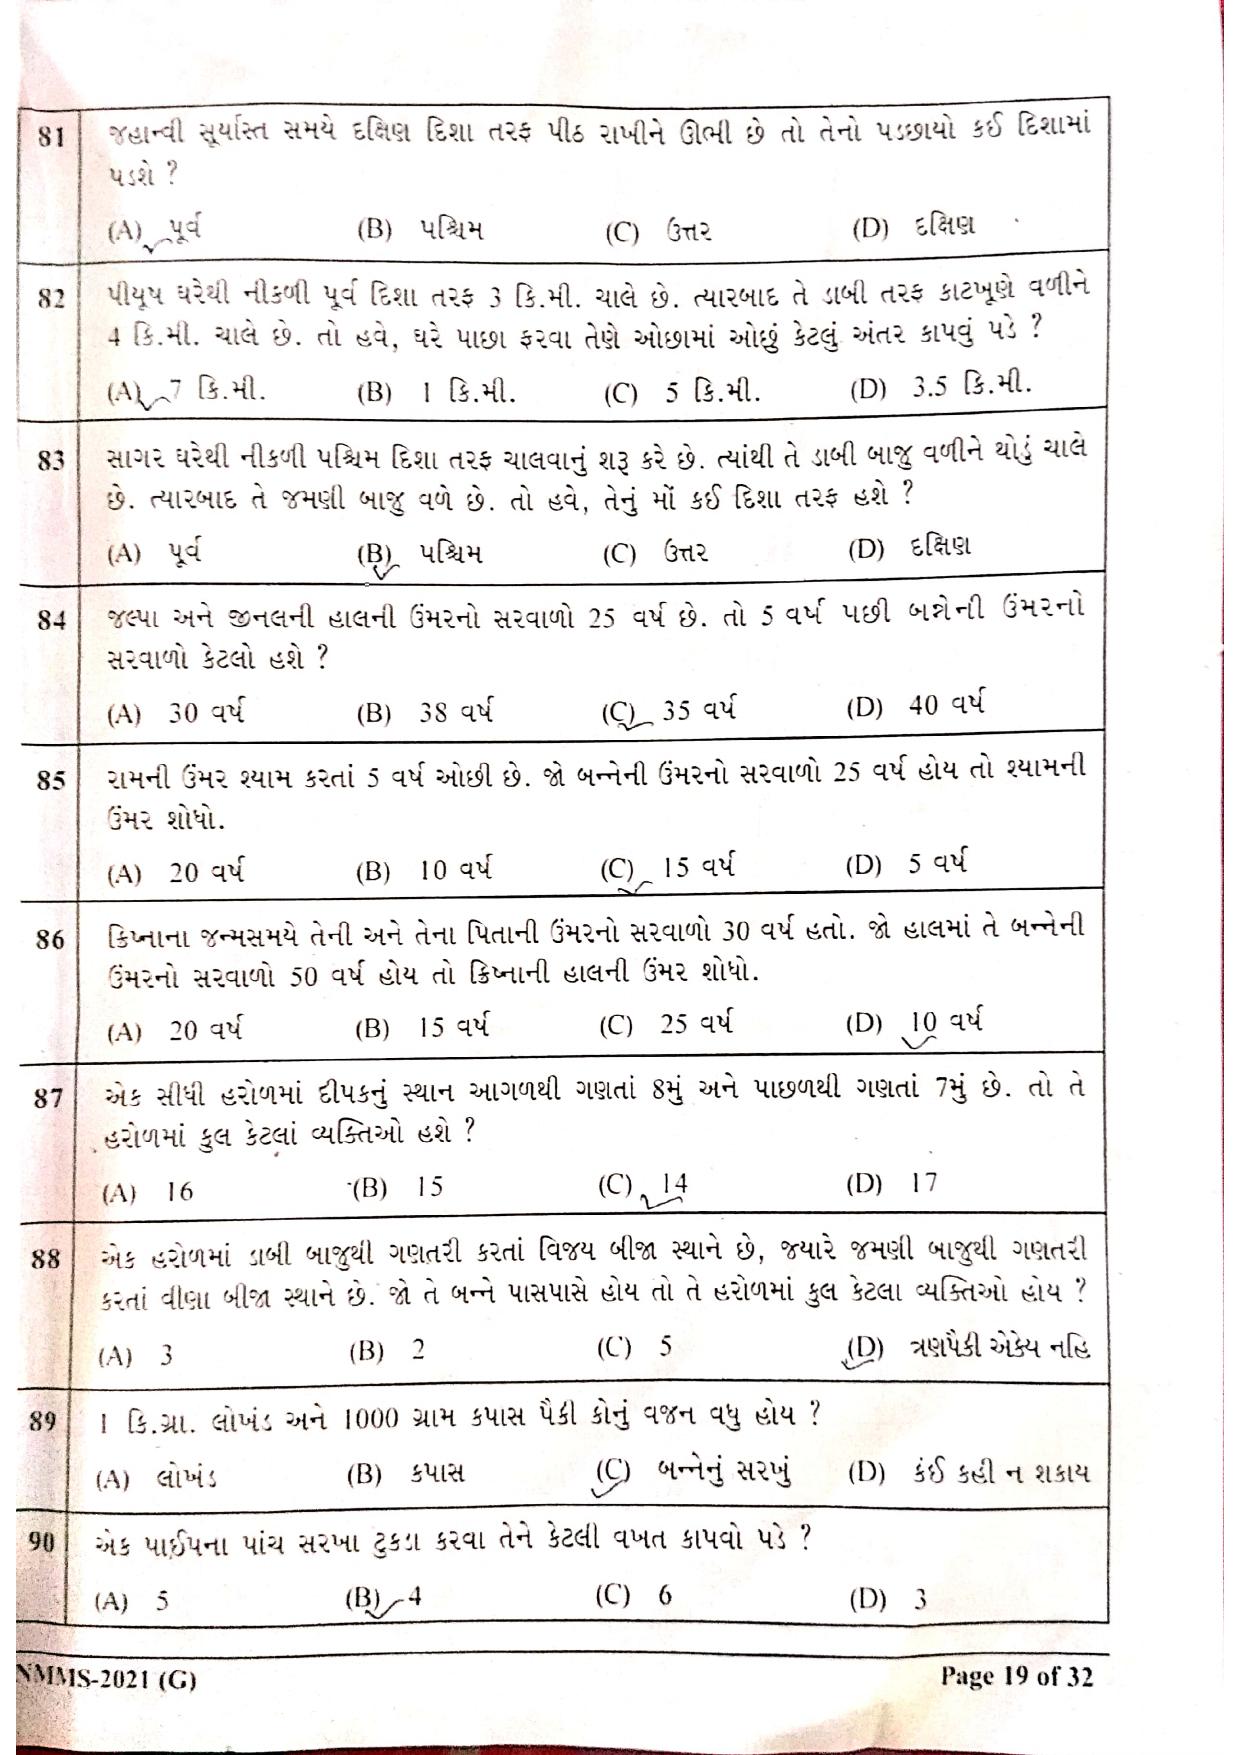 Gujarat NMMS 2021 Question Paper - Page 9